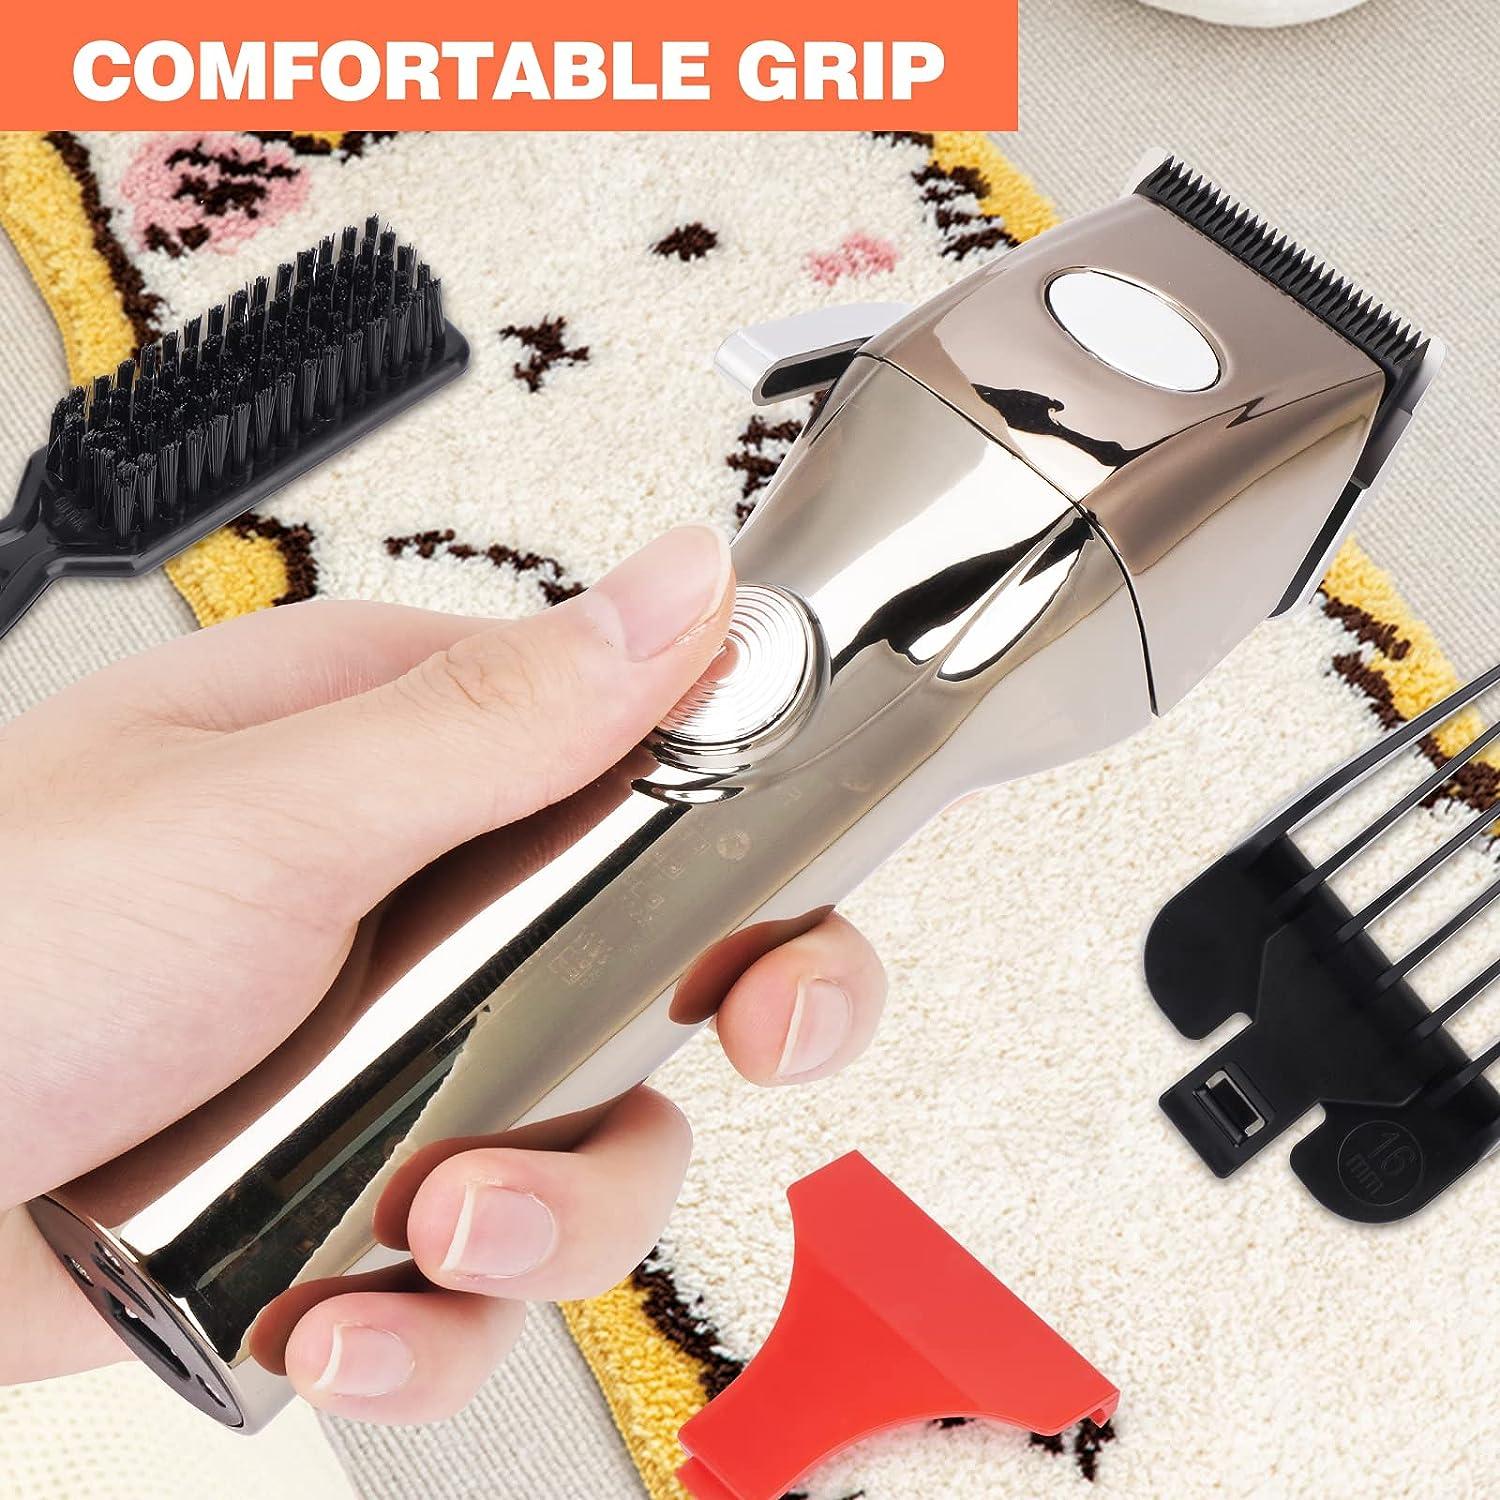 Electric Carpet Trimmer, Tufting Gun, Scissors with Shearing Guide